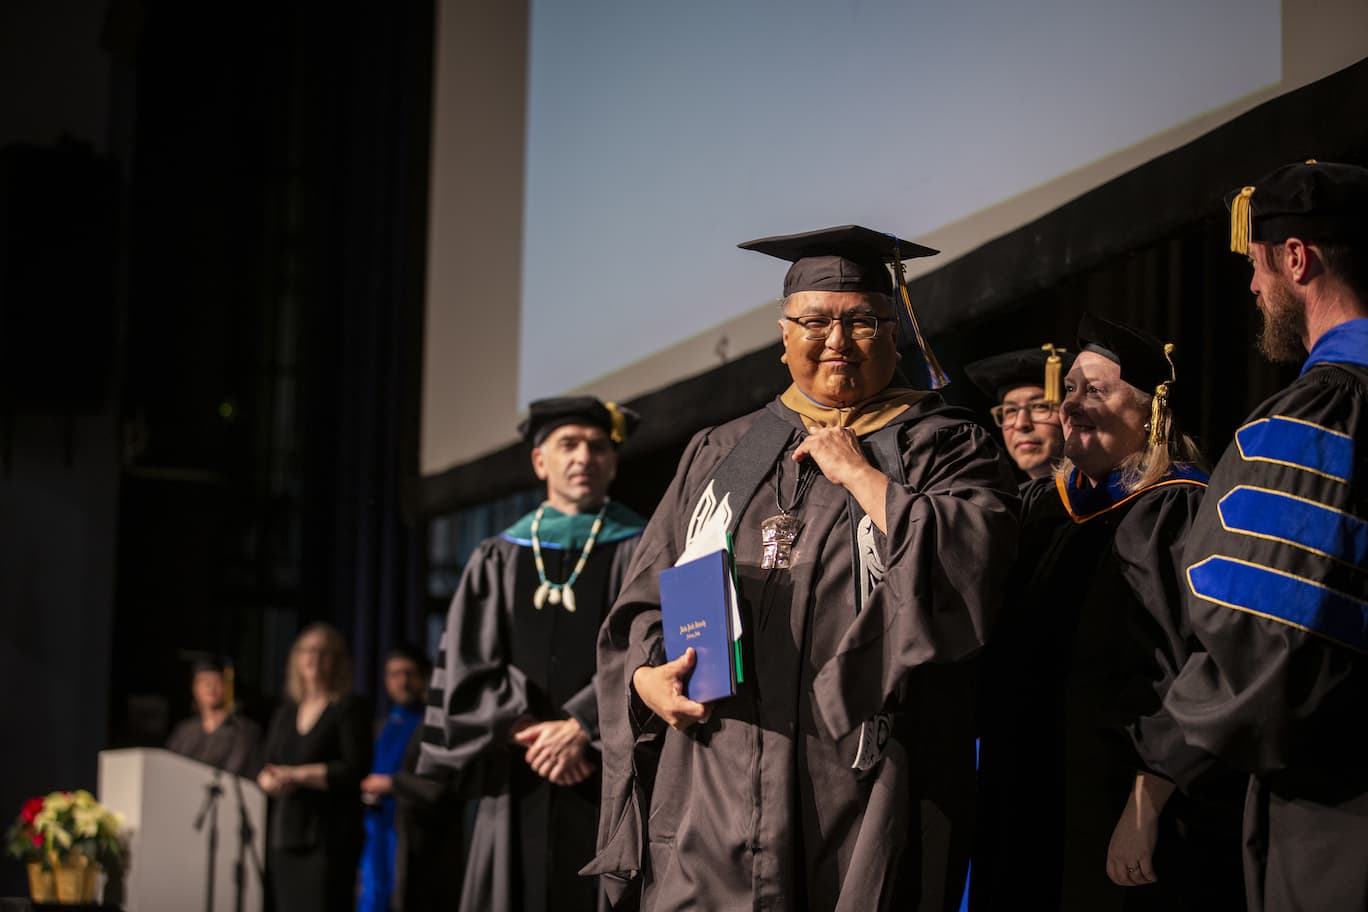 APU grads walk in the fall 2019 Commencement ceremony at the Wendy Williamson Auditorium on the campus of the University of Alaska, Anchorage on December 14, 2019.